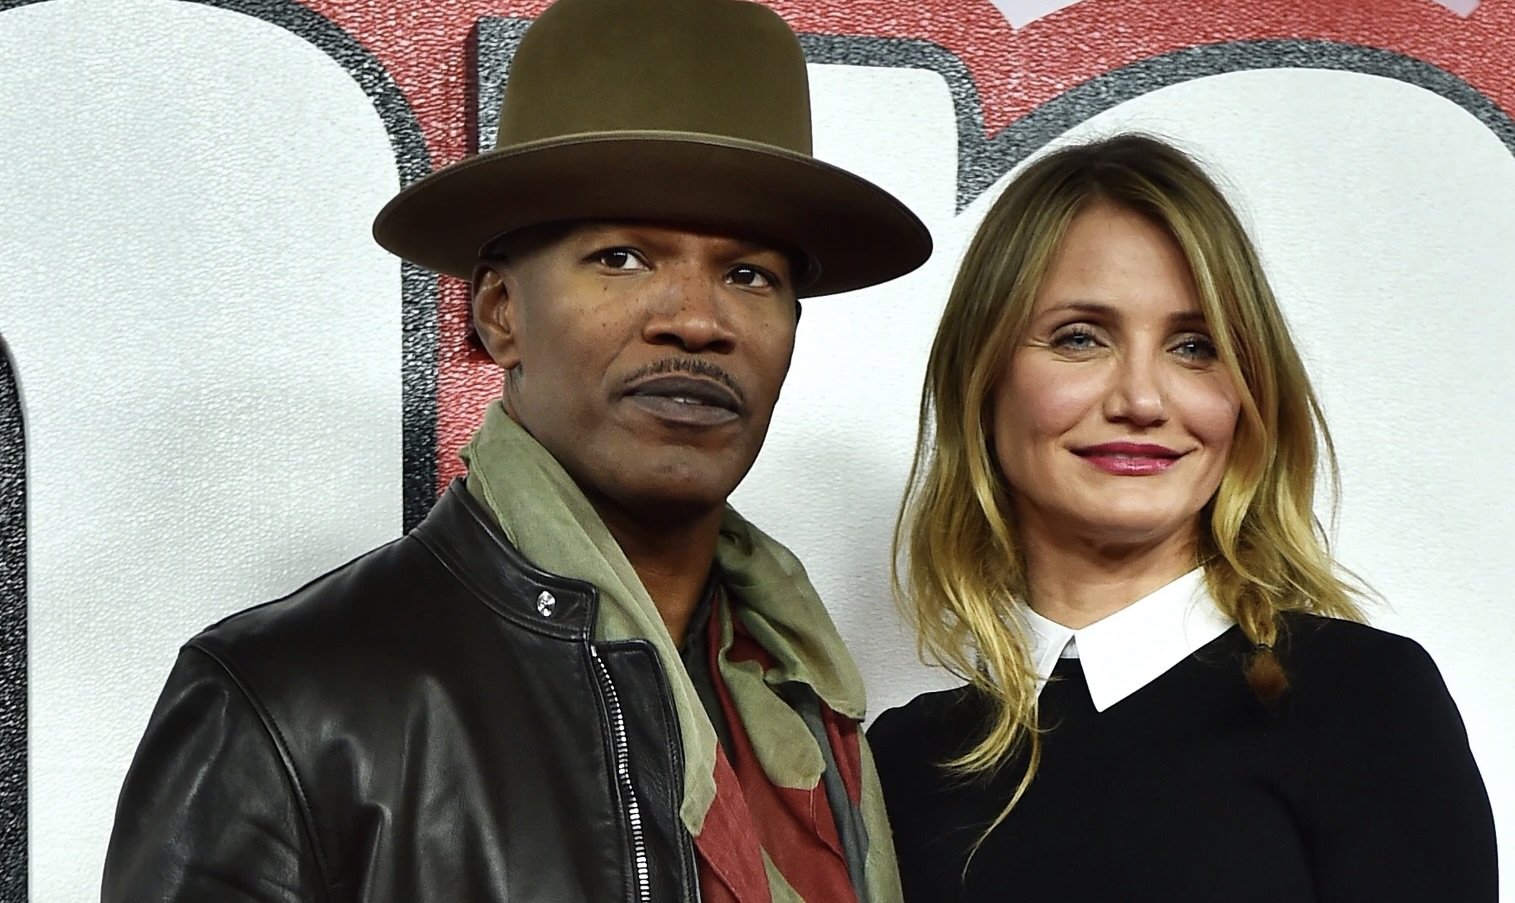 Cameron Diaz Feels ‘Guilt’ Over Quarrels with Jamie Foxx Before Mystery Hospitalization, Friends Says in Report